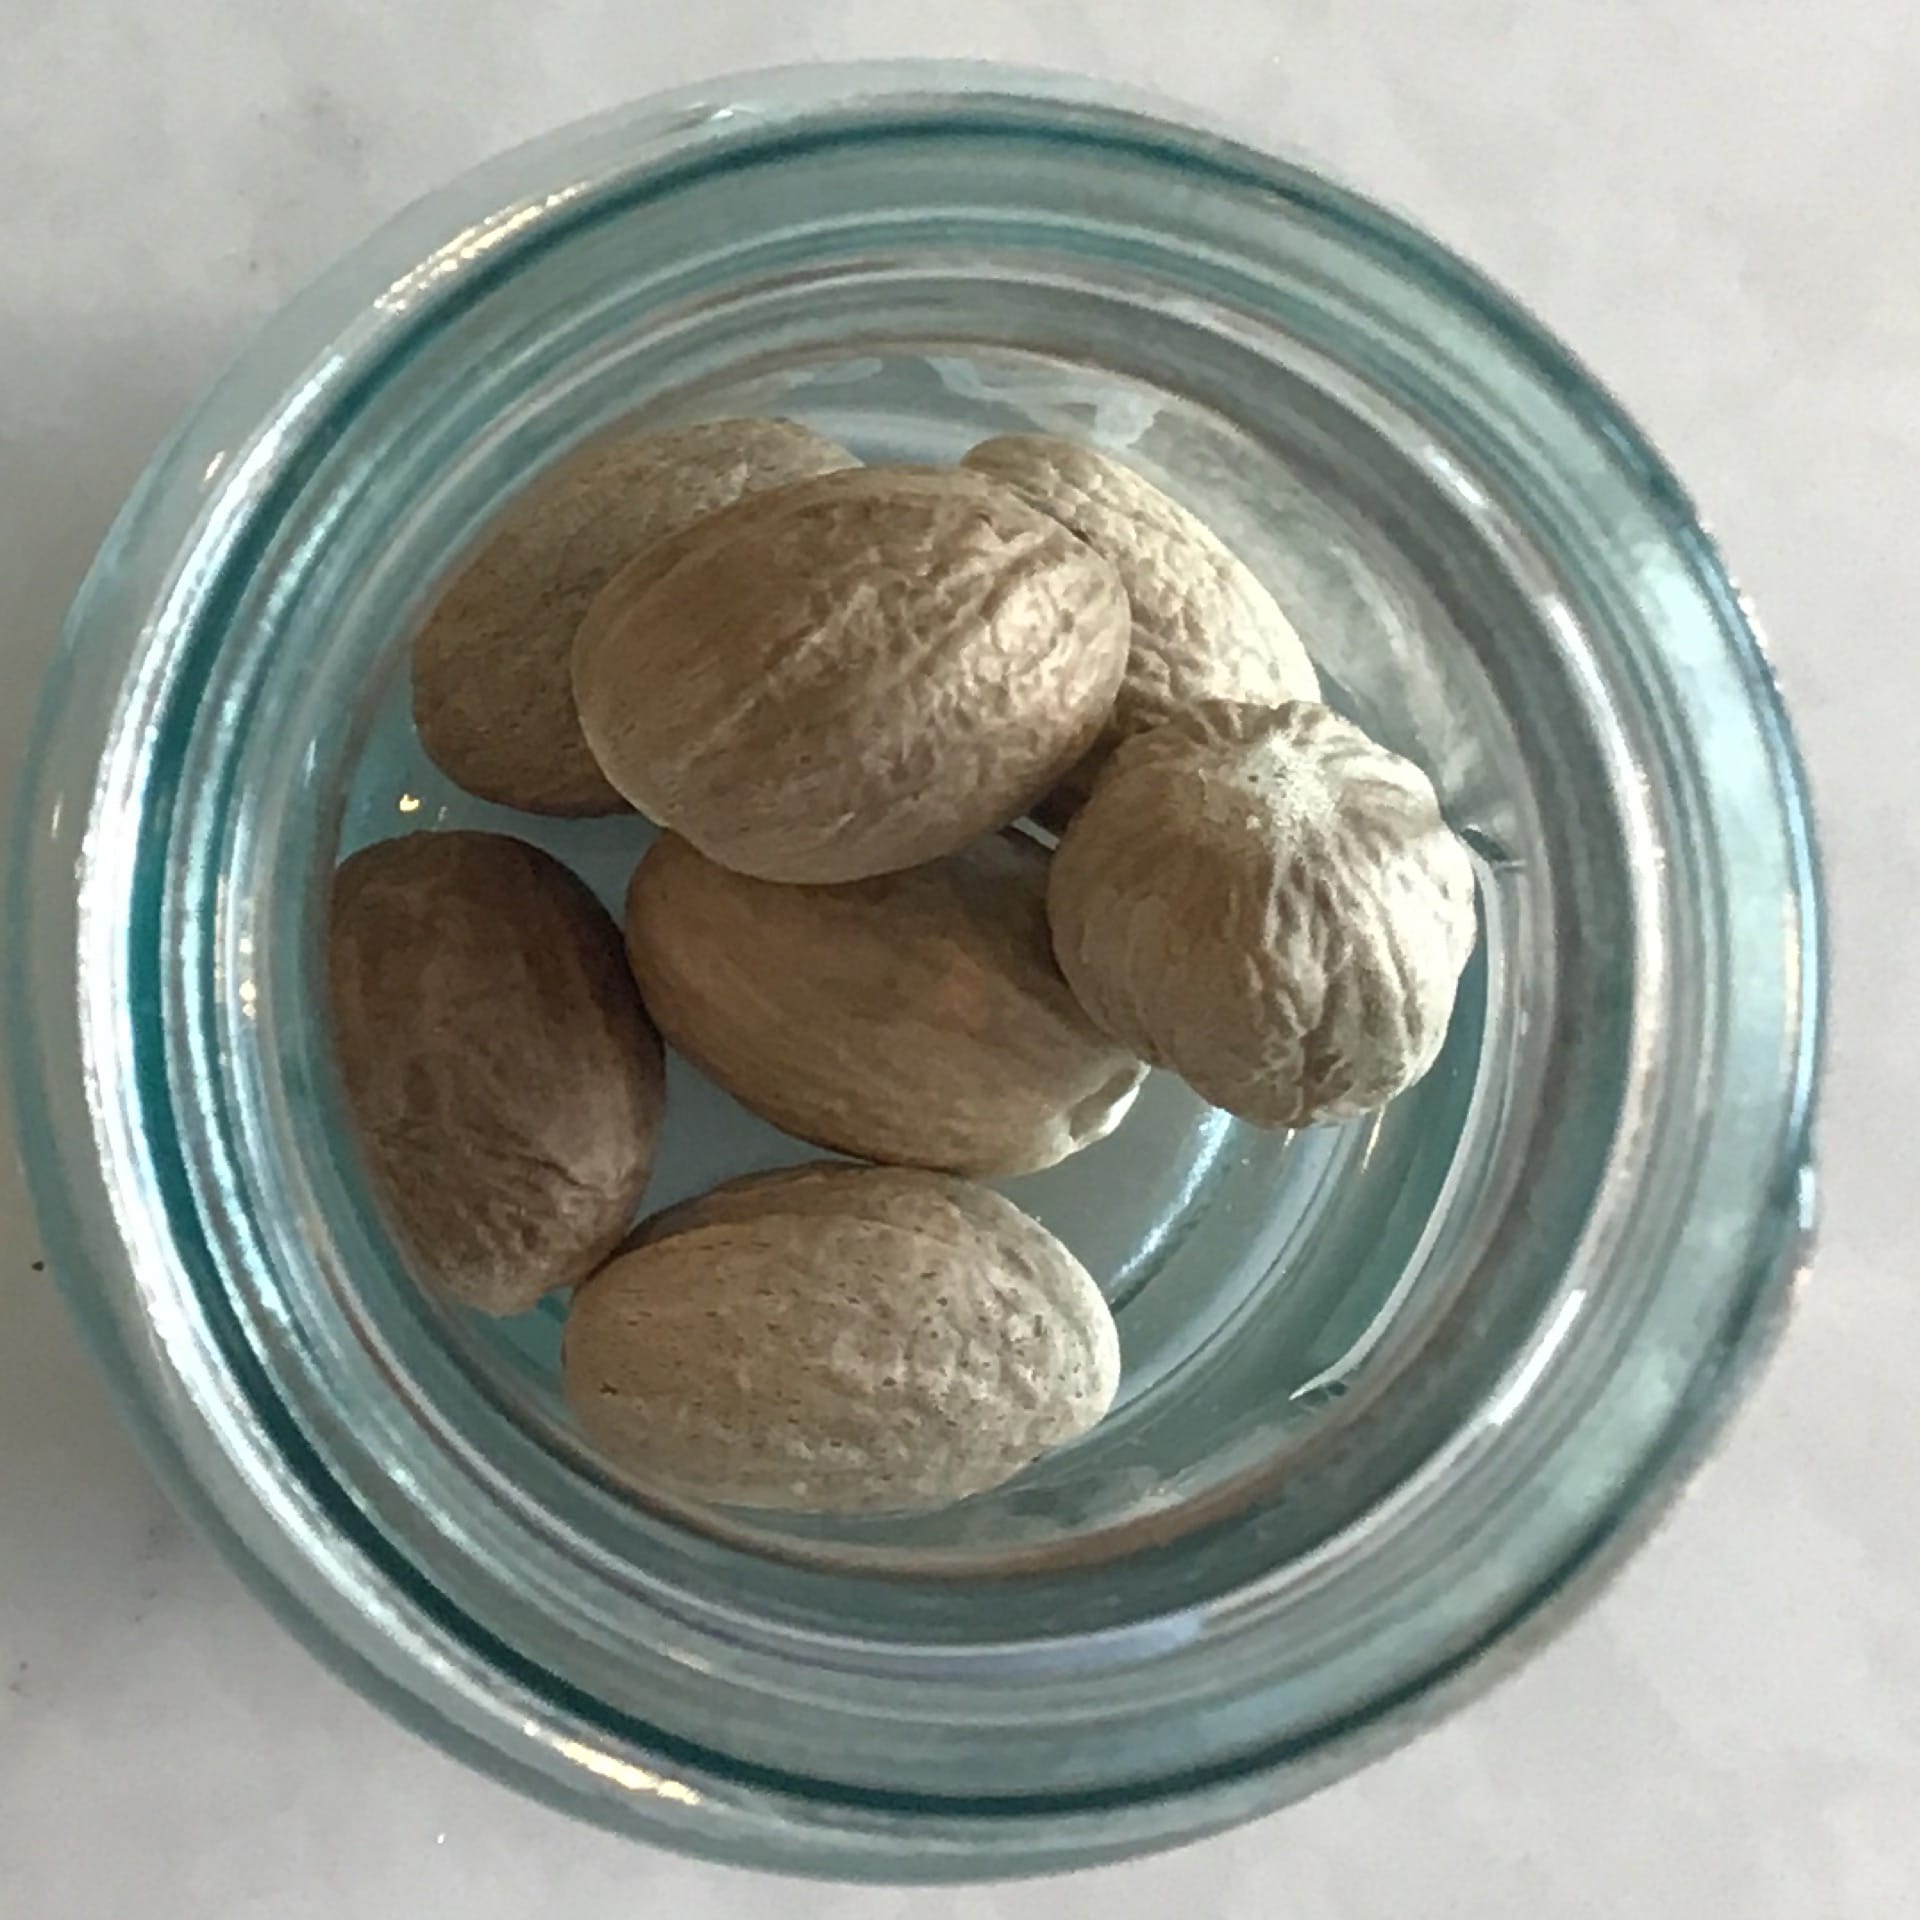 Buy down to one nutmeg pod (don’t buy a whole container when you don’t need it)